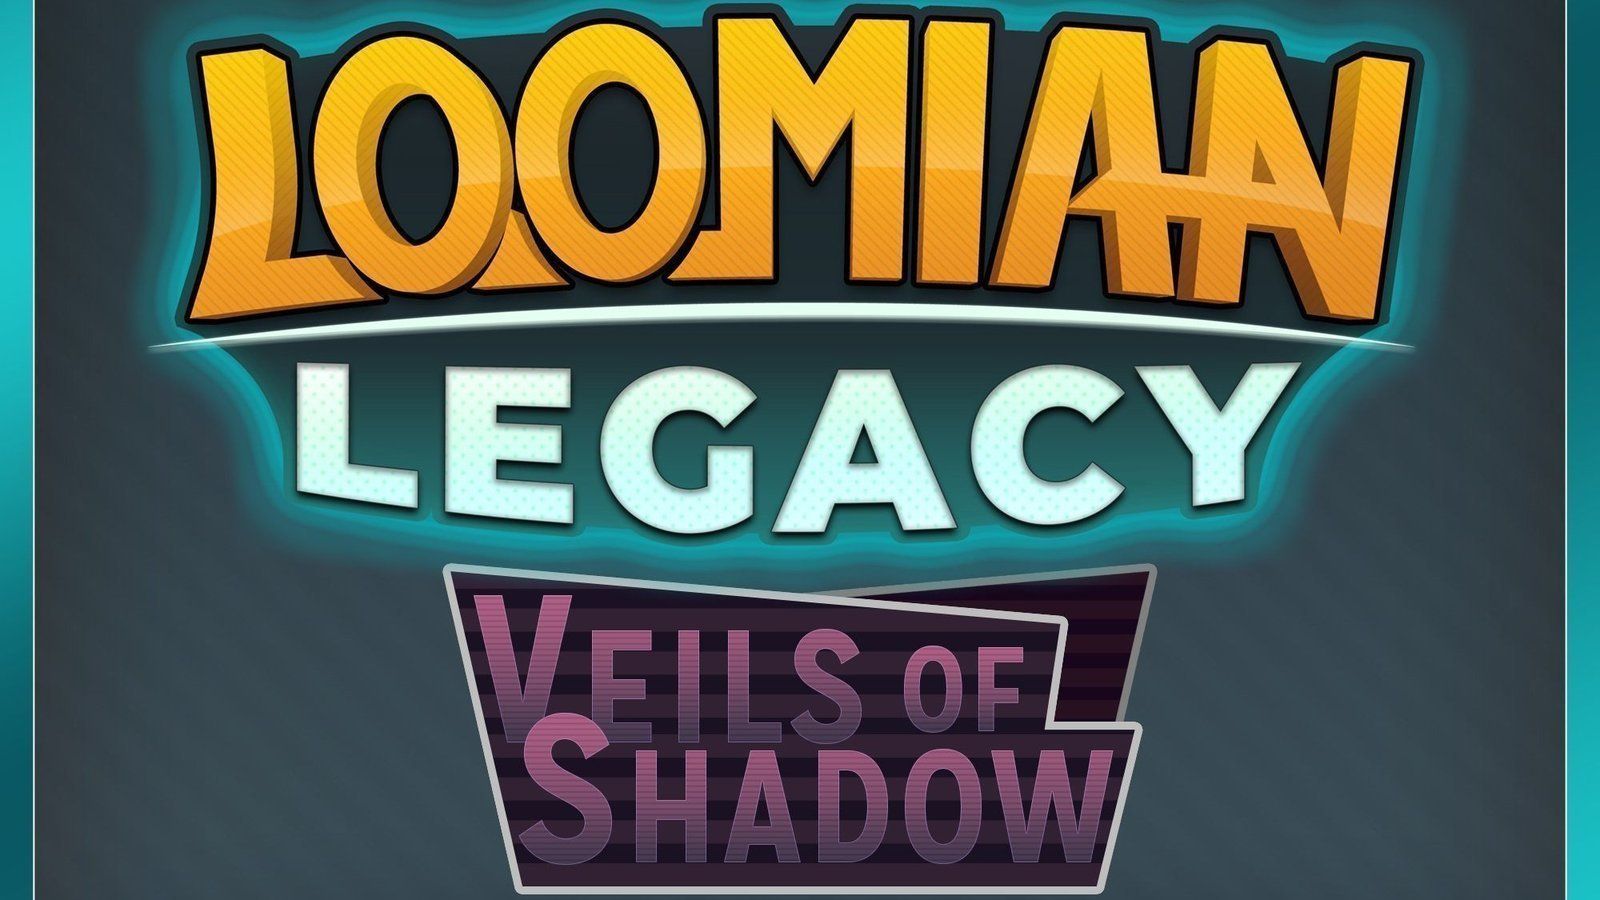 Petition · Free Shiny Recolored Loomian For Early Players Of Loomian Legacy · Change.org